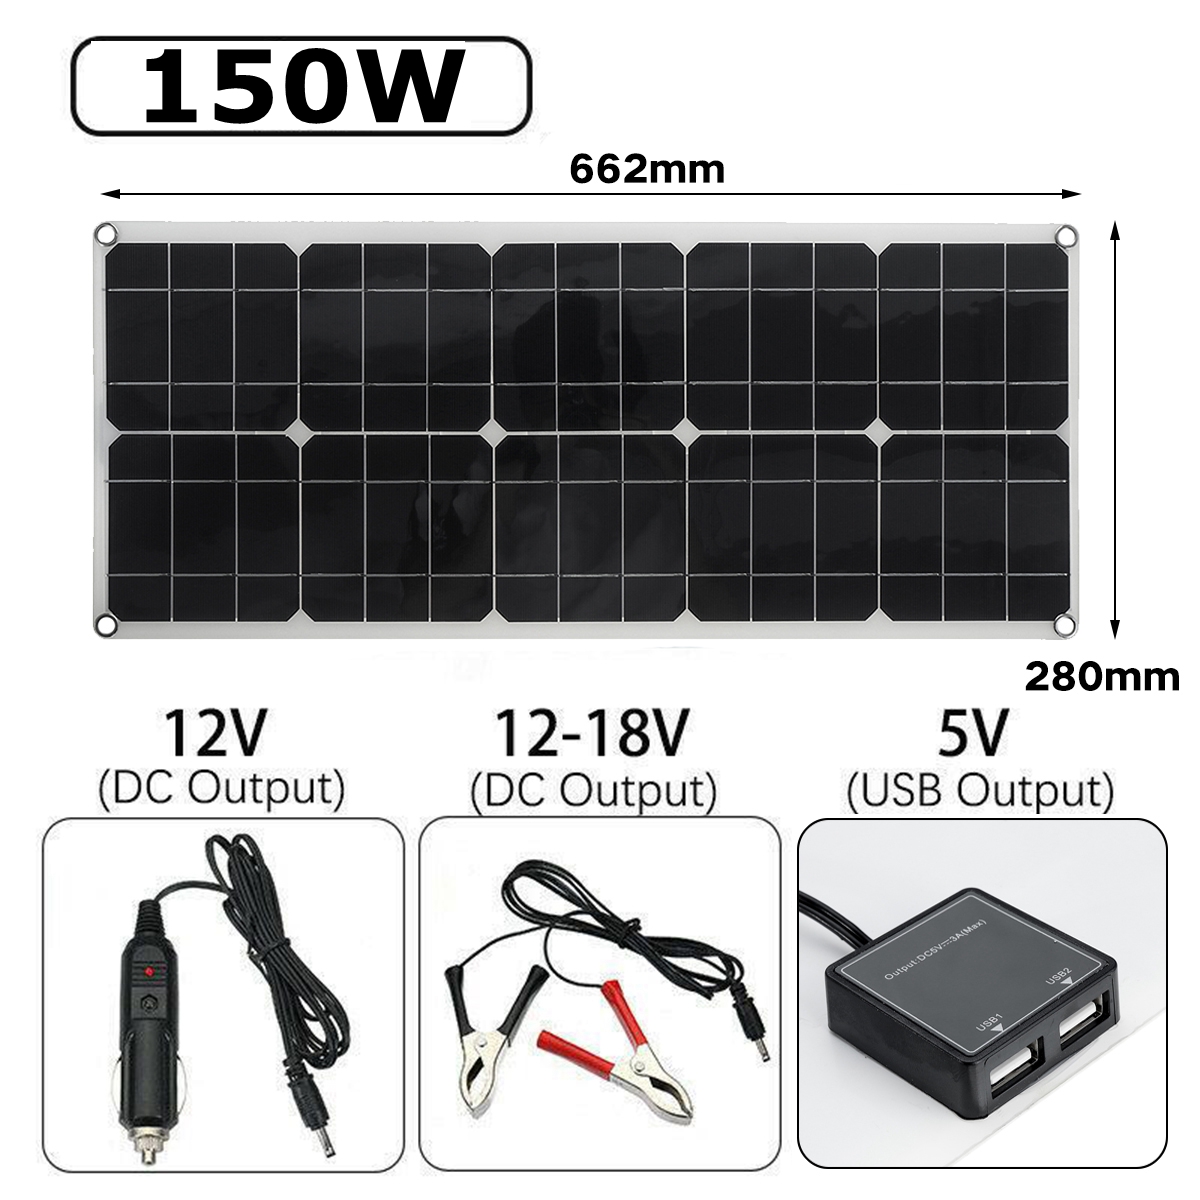 18V-Flexible-Solar-Panel-150W-5V-Dual-USB-Power-Bank-Solar-Panel-Kit-Complete-with-Controller-for-Ou-1757603-3